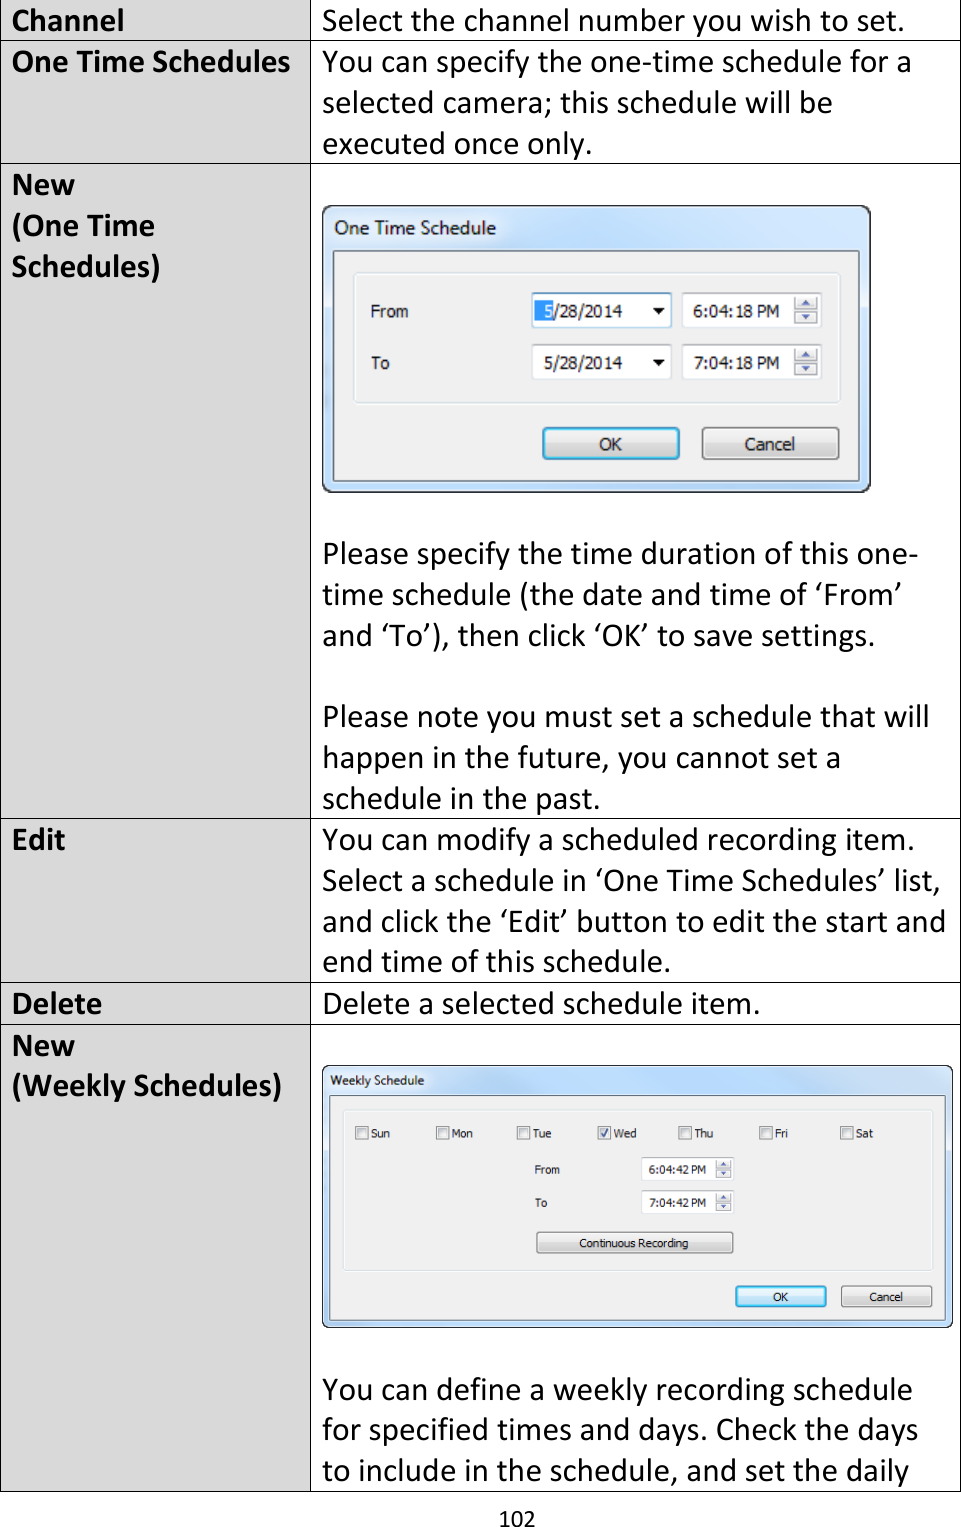 102   Channel Select the channel number you wish to set. One Time Schedules You can specify the one-time schedule for a selected camera; this schedule will be executed once only. New  (One Time Schedules)    Please specify the time duration of this one-time schedule (the date and time of ‘From’ and ‘To’), then click ‘OK’ to save settings.  Please note you must set a schedule that will happen in the future, you cannot set a schedule in the past. Edit You can modify a scheduled recording item. Select a schedule in ‘One Time Schedules’ list, and click the ‘Edit’ button to edit the start and end time of this schedule. Delete Delete a selected schedule item. New (Weekly Schedules)    You can define a weekly recording schedule for specified times and days. Check the days to include in the schedule, and set the daily 